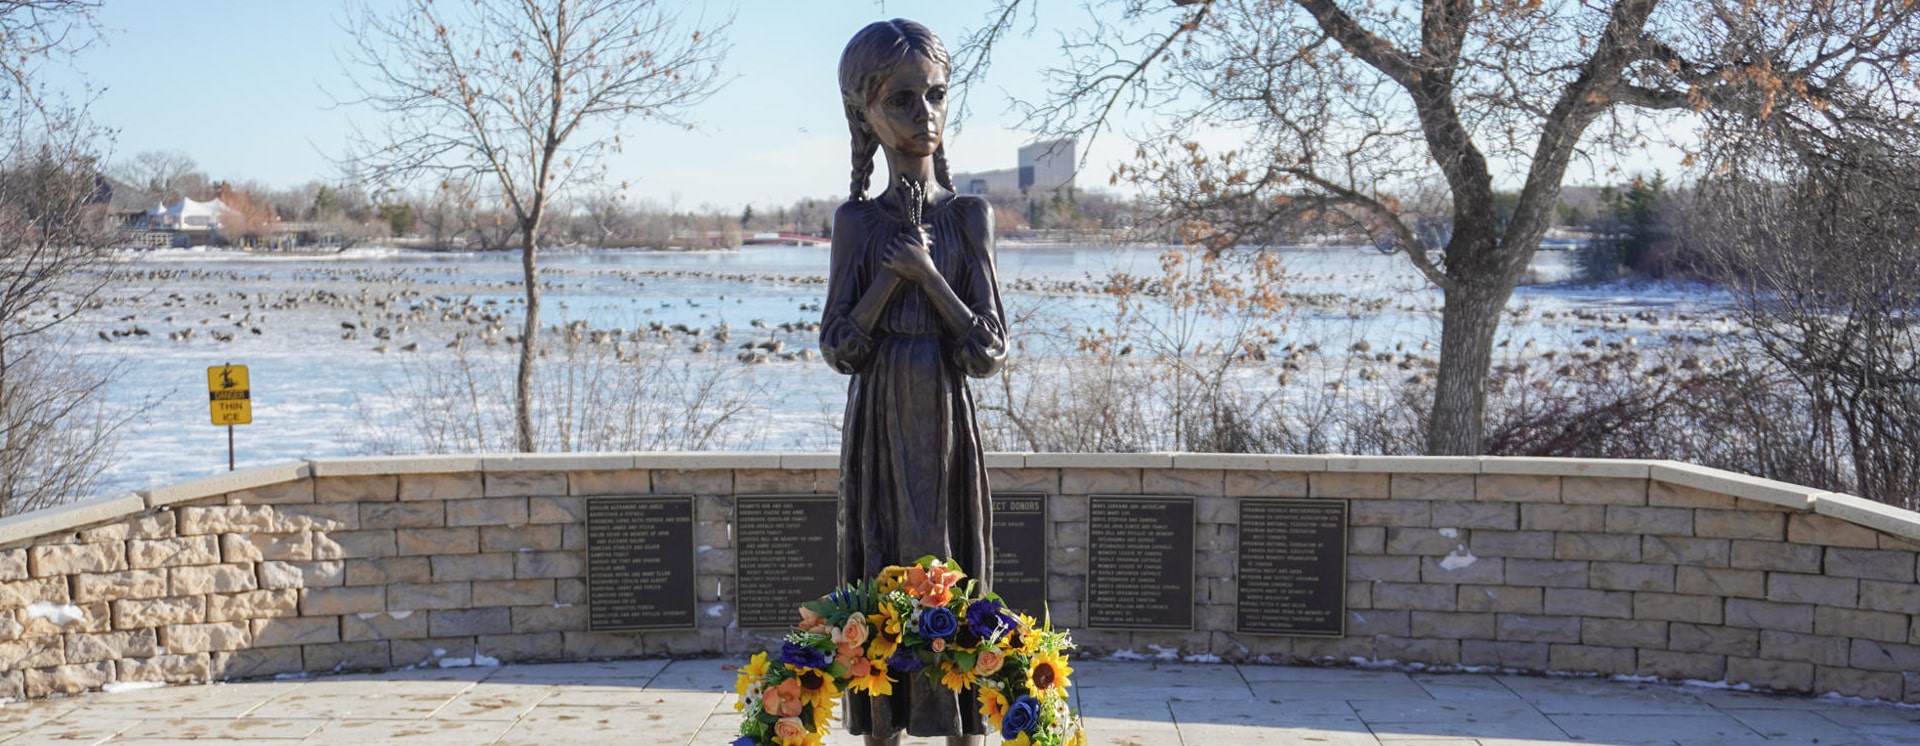 Statue of a small girl clutching ears of wheat to her chest at Ukraine’s National Museum of the Holodomor Genocide